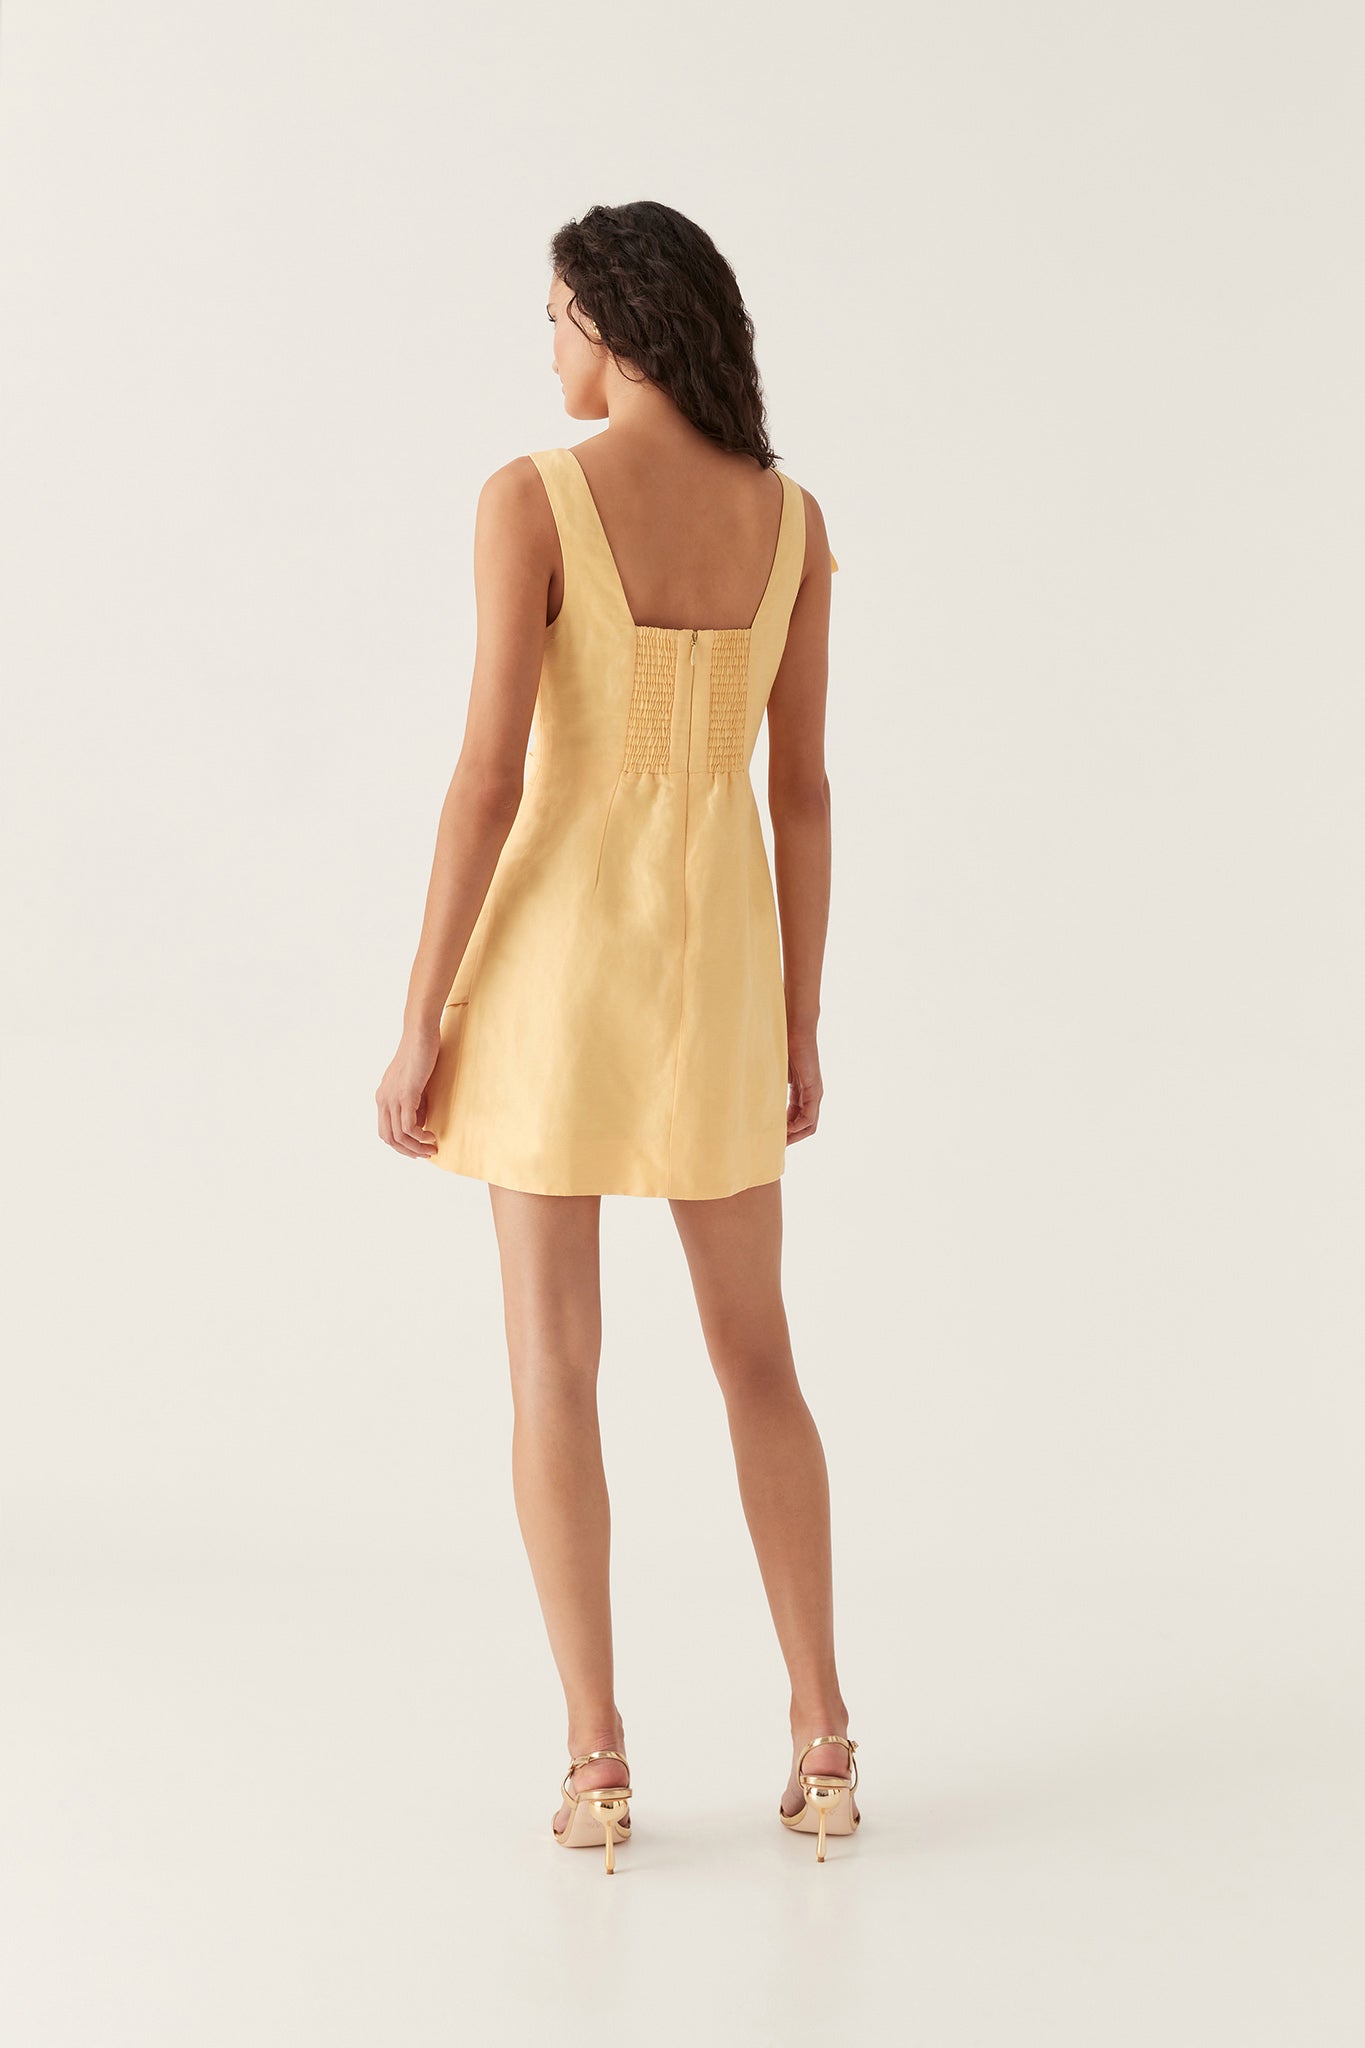 Aje off-shoulder strapless gown - Yellow